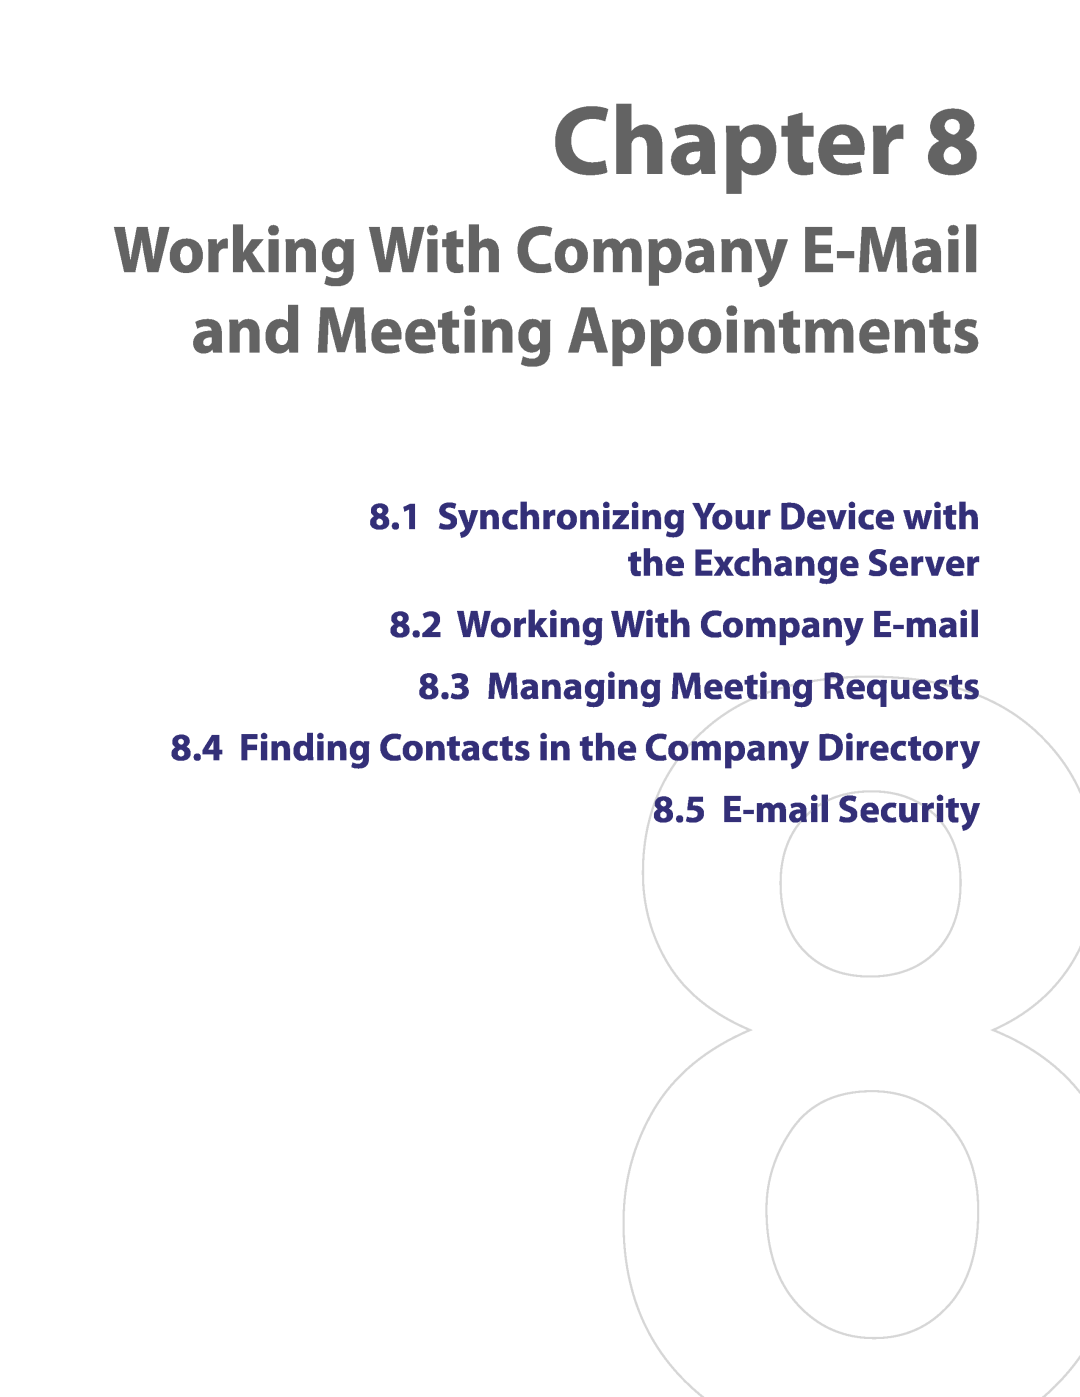 HTC PDA Phone user manual Working With Company E-mail 8.3 Managing Meeting Requests, Chapter 